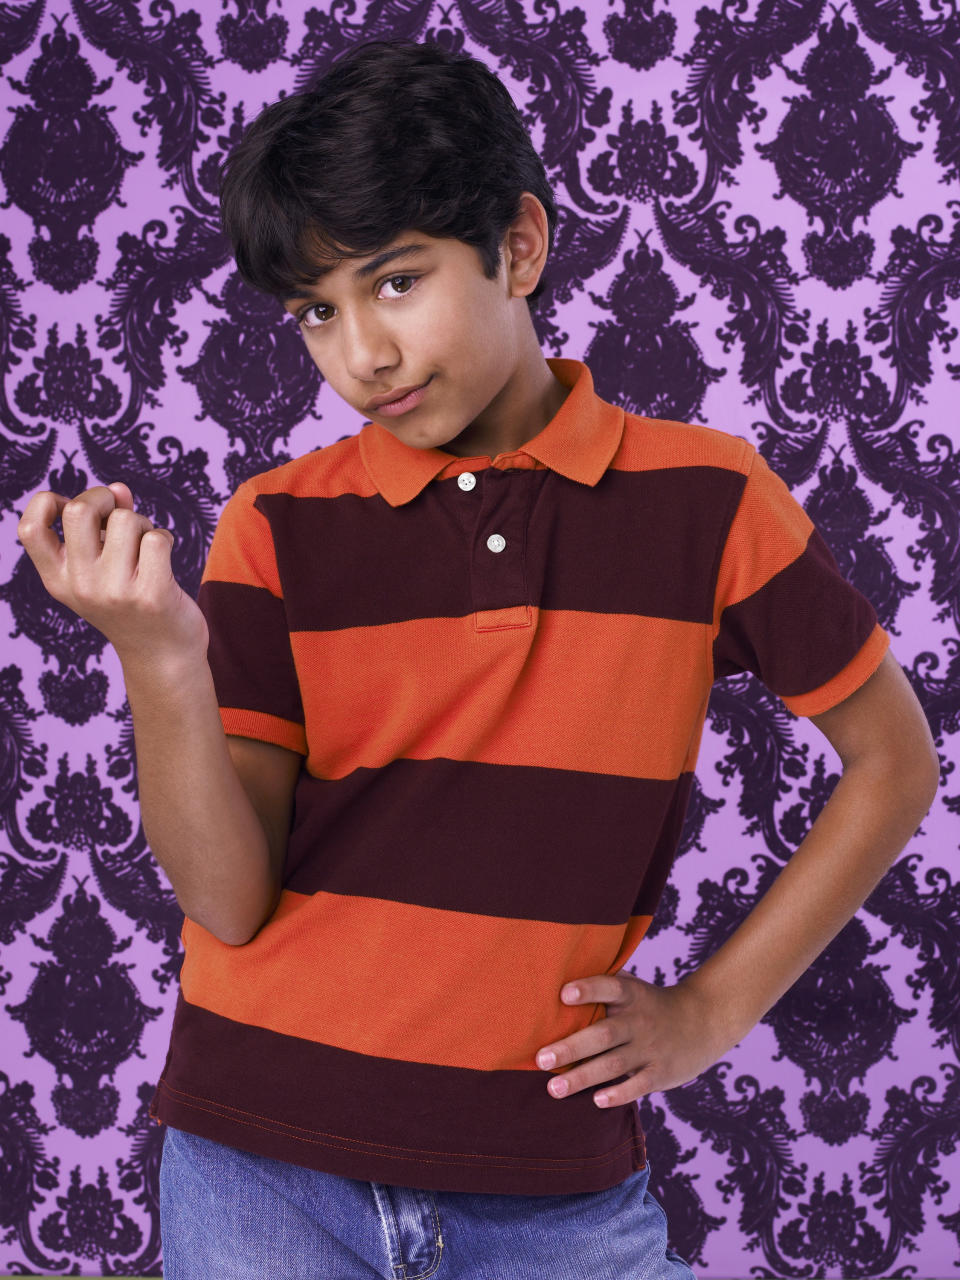 Where you know them: Mark Indelicato's breakout role was as Justin Suarez, niece to Betty Suarez (America Ferrera) in the hit TV series, Ugly Betty. He appeared in all 85 episodes during the show's four-season run from 2006 to 2010.